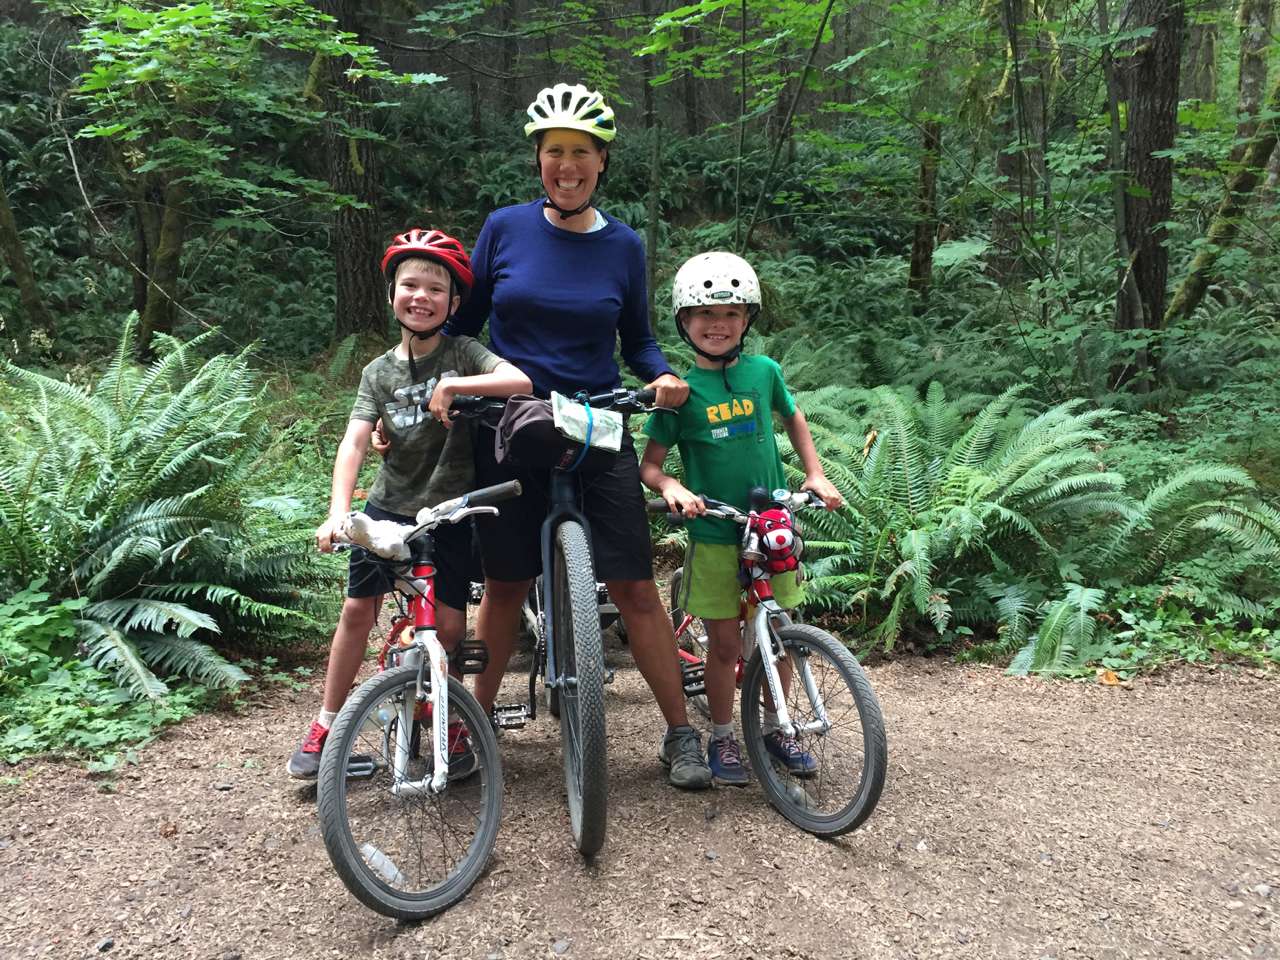 A woman flanked by a boy on either side, all smiling as they sit astride bicycles against a green backdrop of sword ferns and trees.